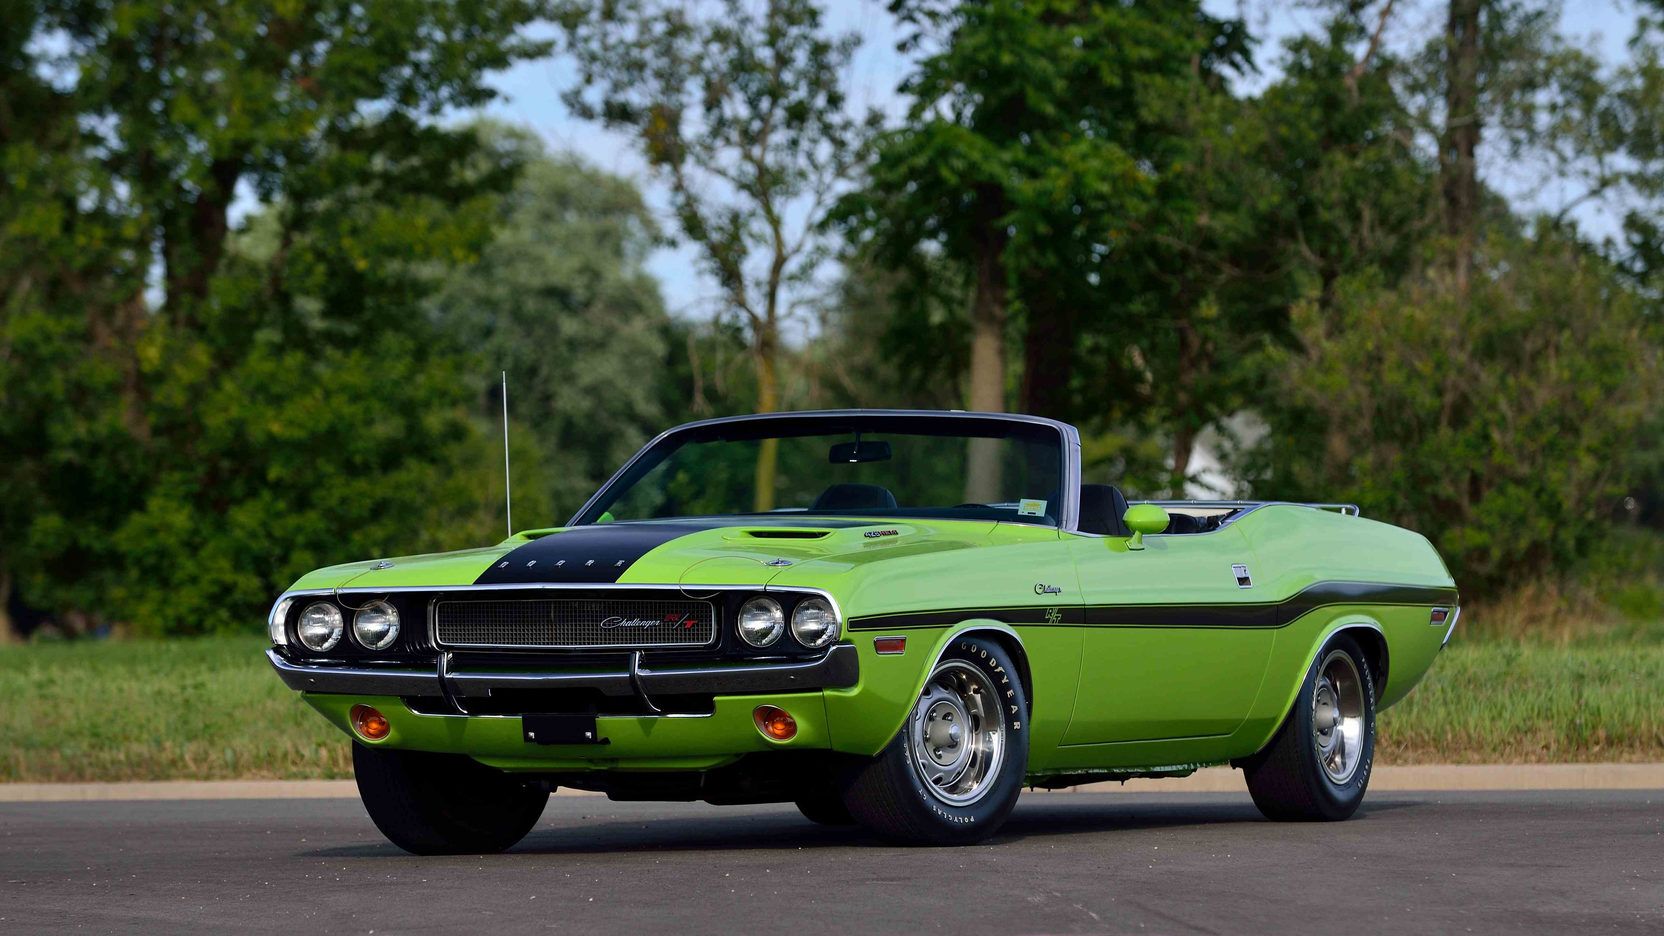 A rare sublime green 1970 Dodge Challenger R/T Hemi Convertible showing off